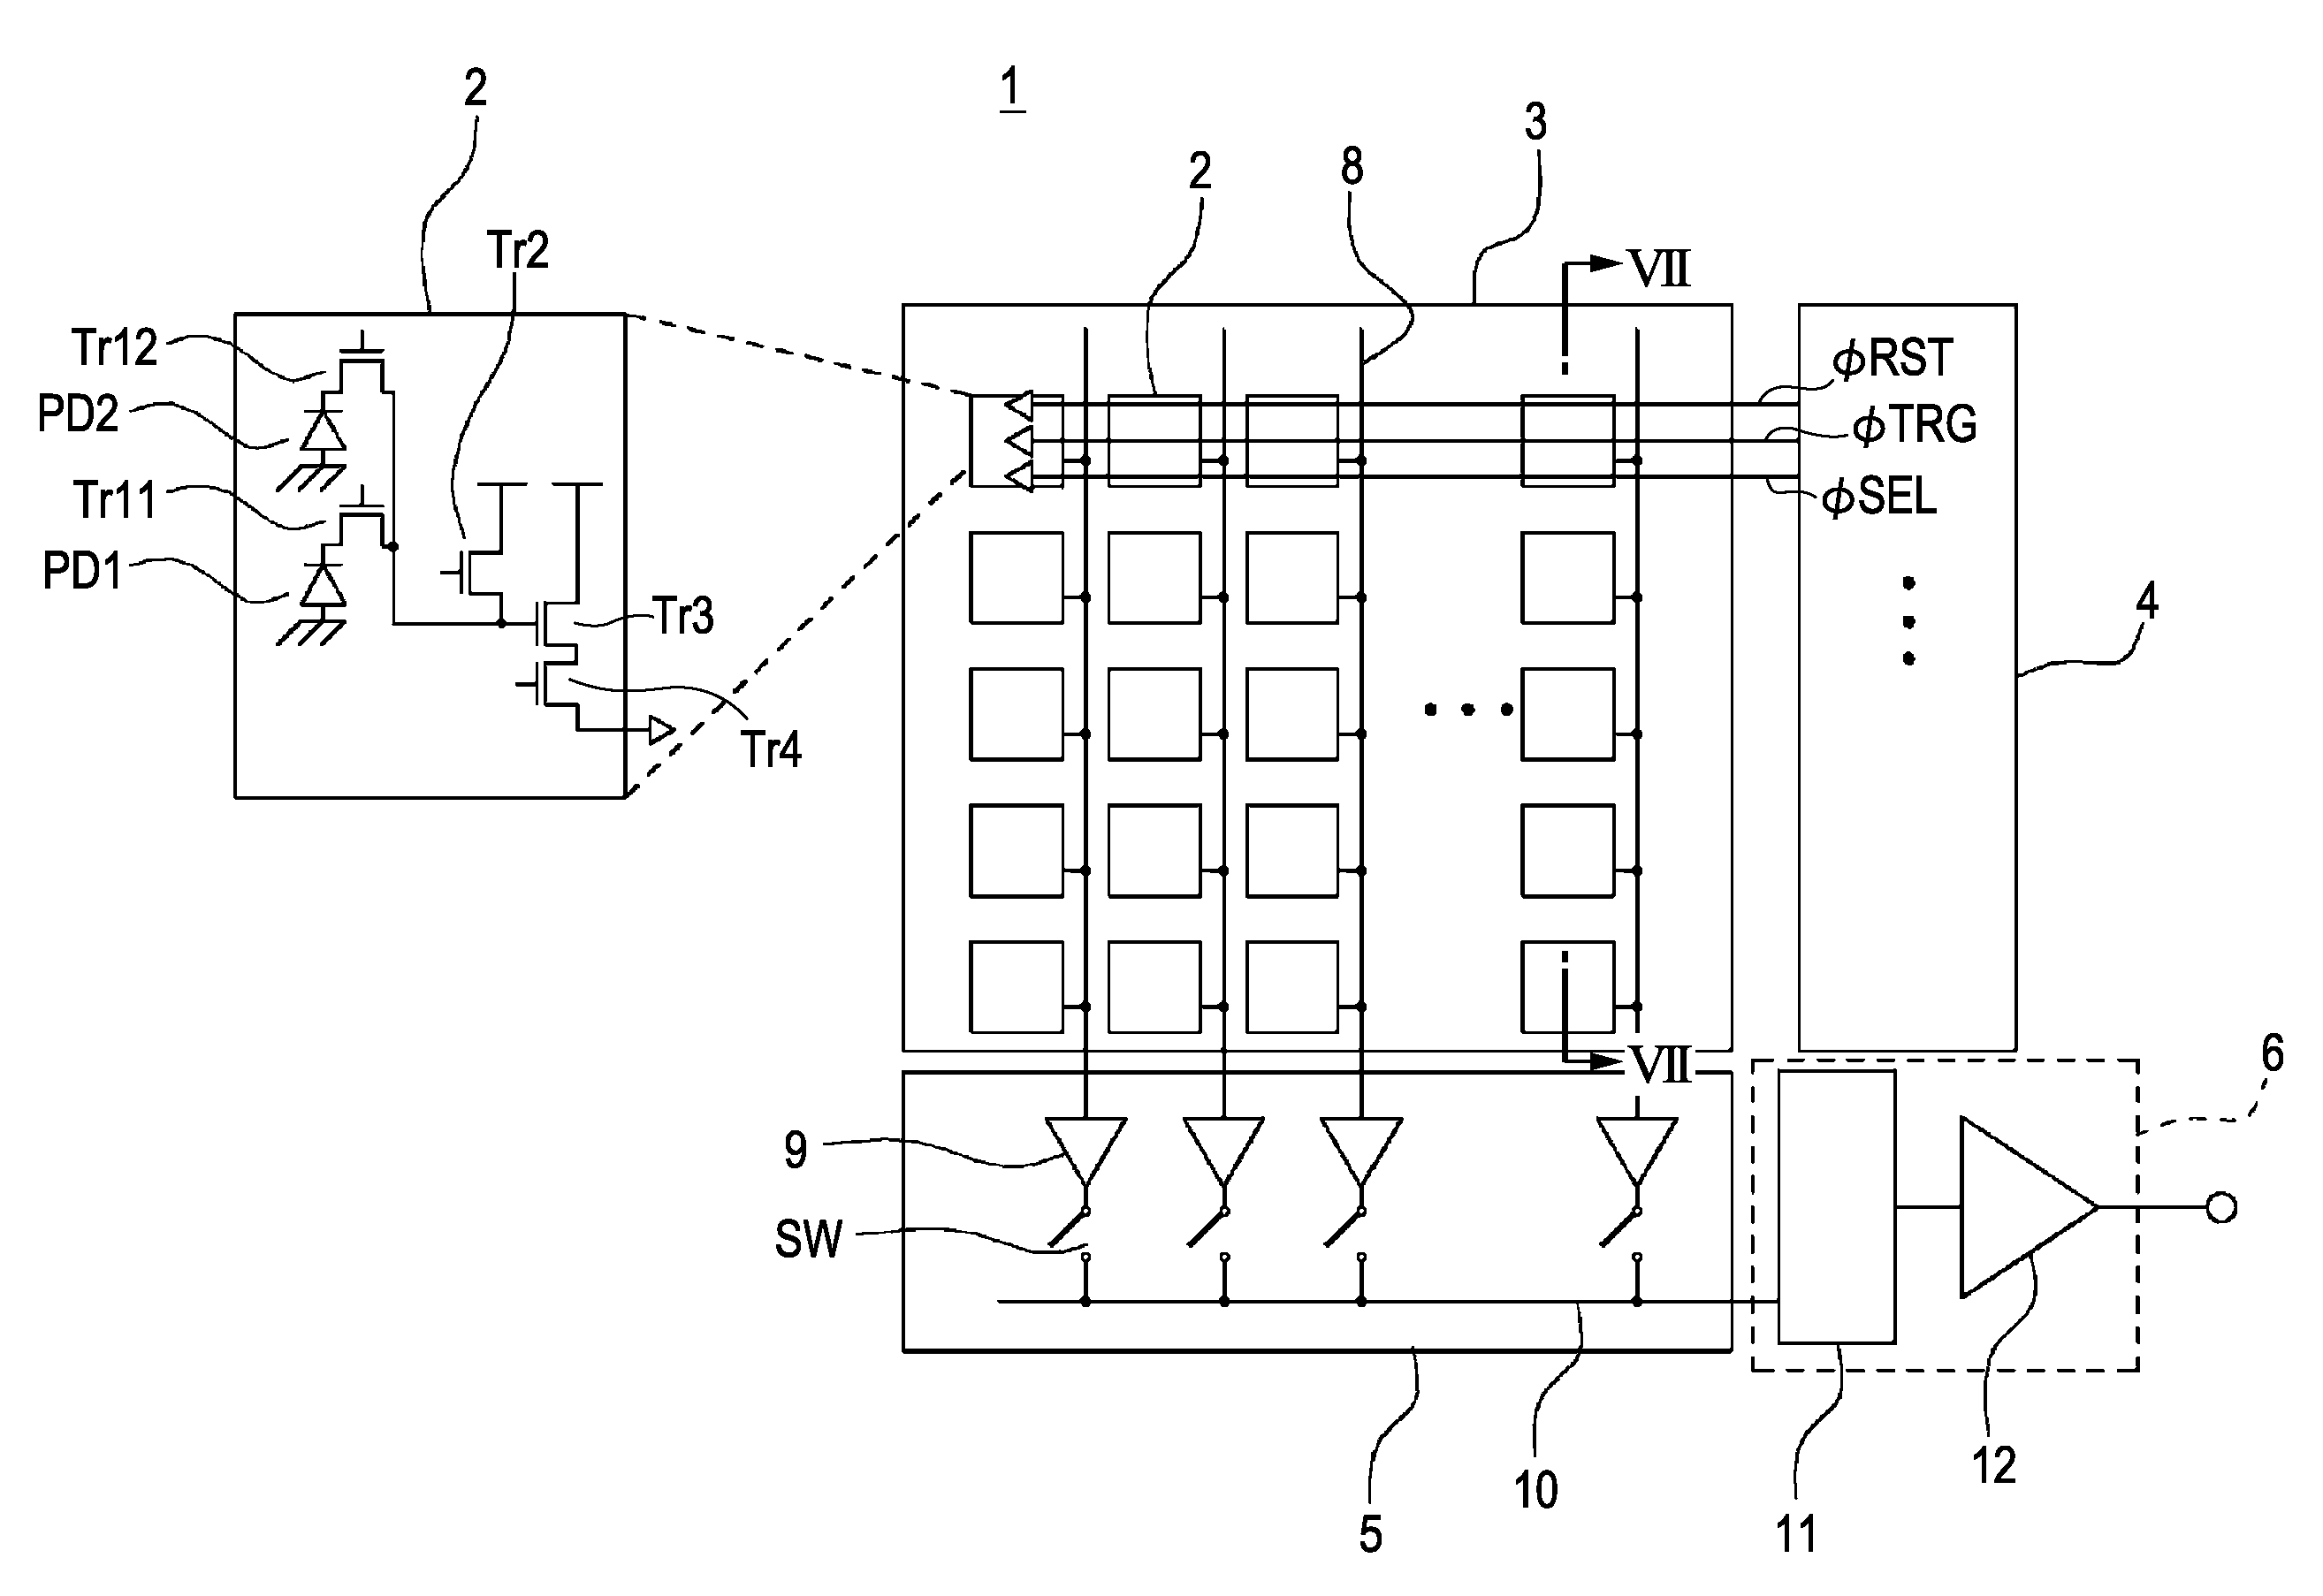 Solid-state imaging device with on chip lenses with adjust characteristics to render pixel output sensitivities more uniform